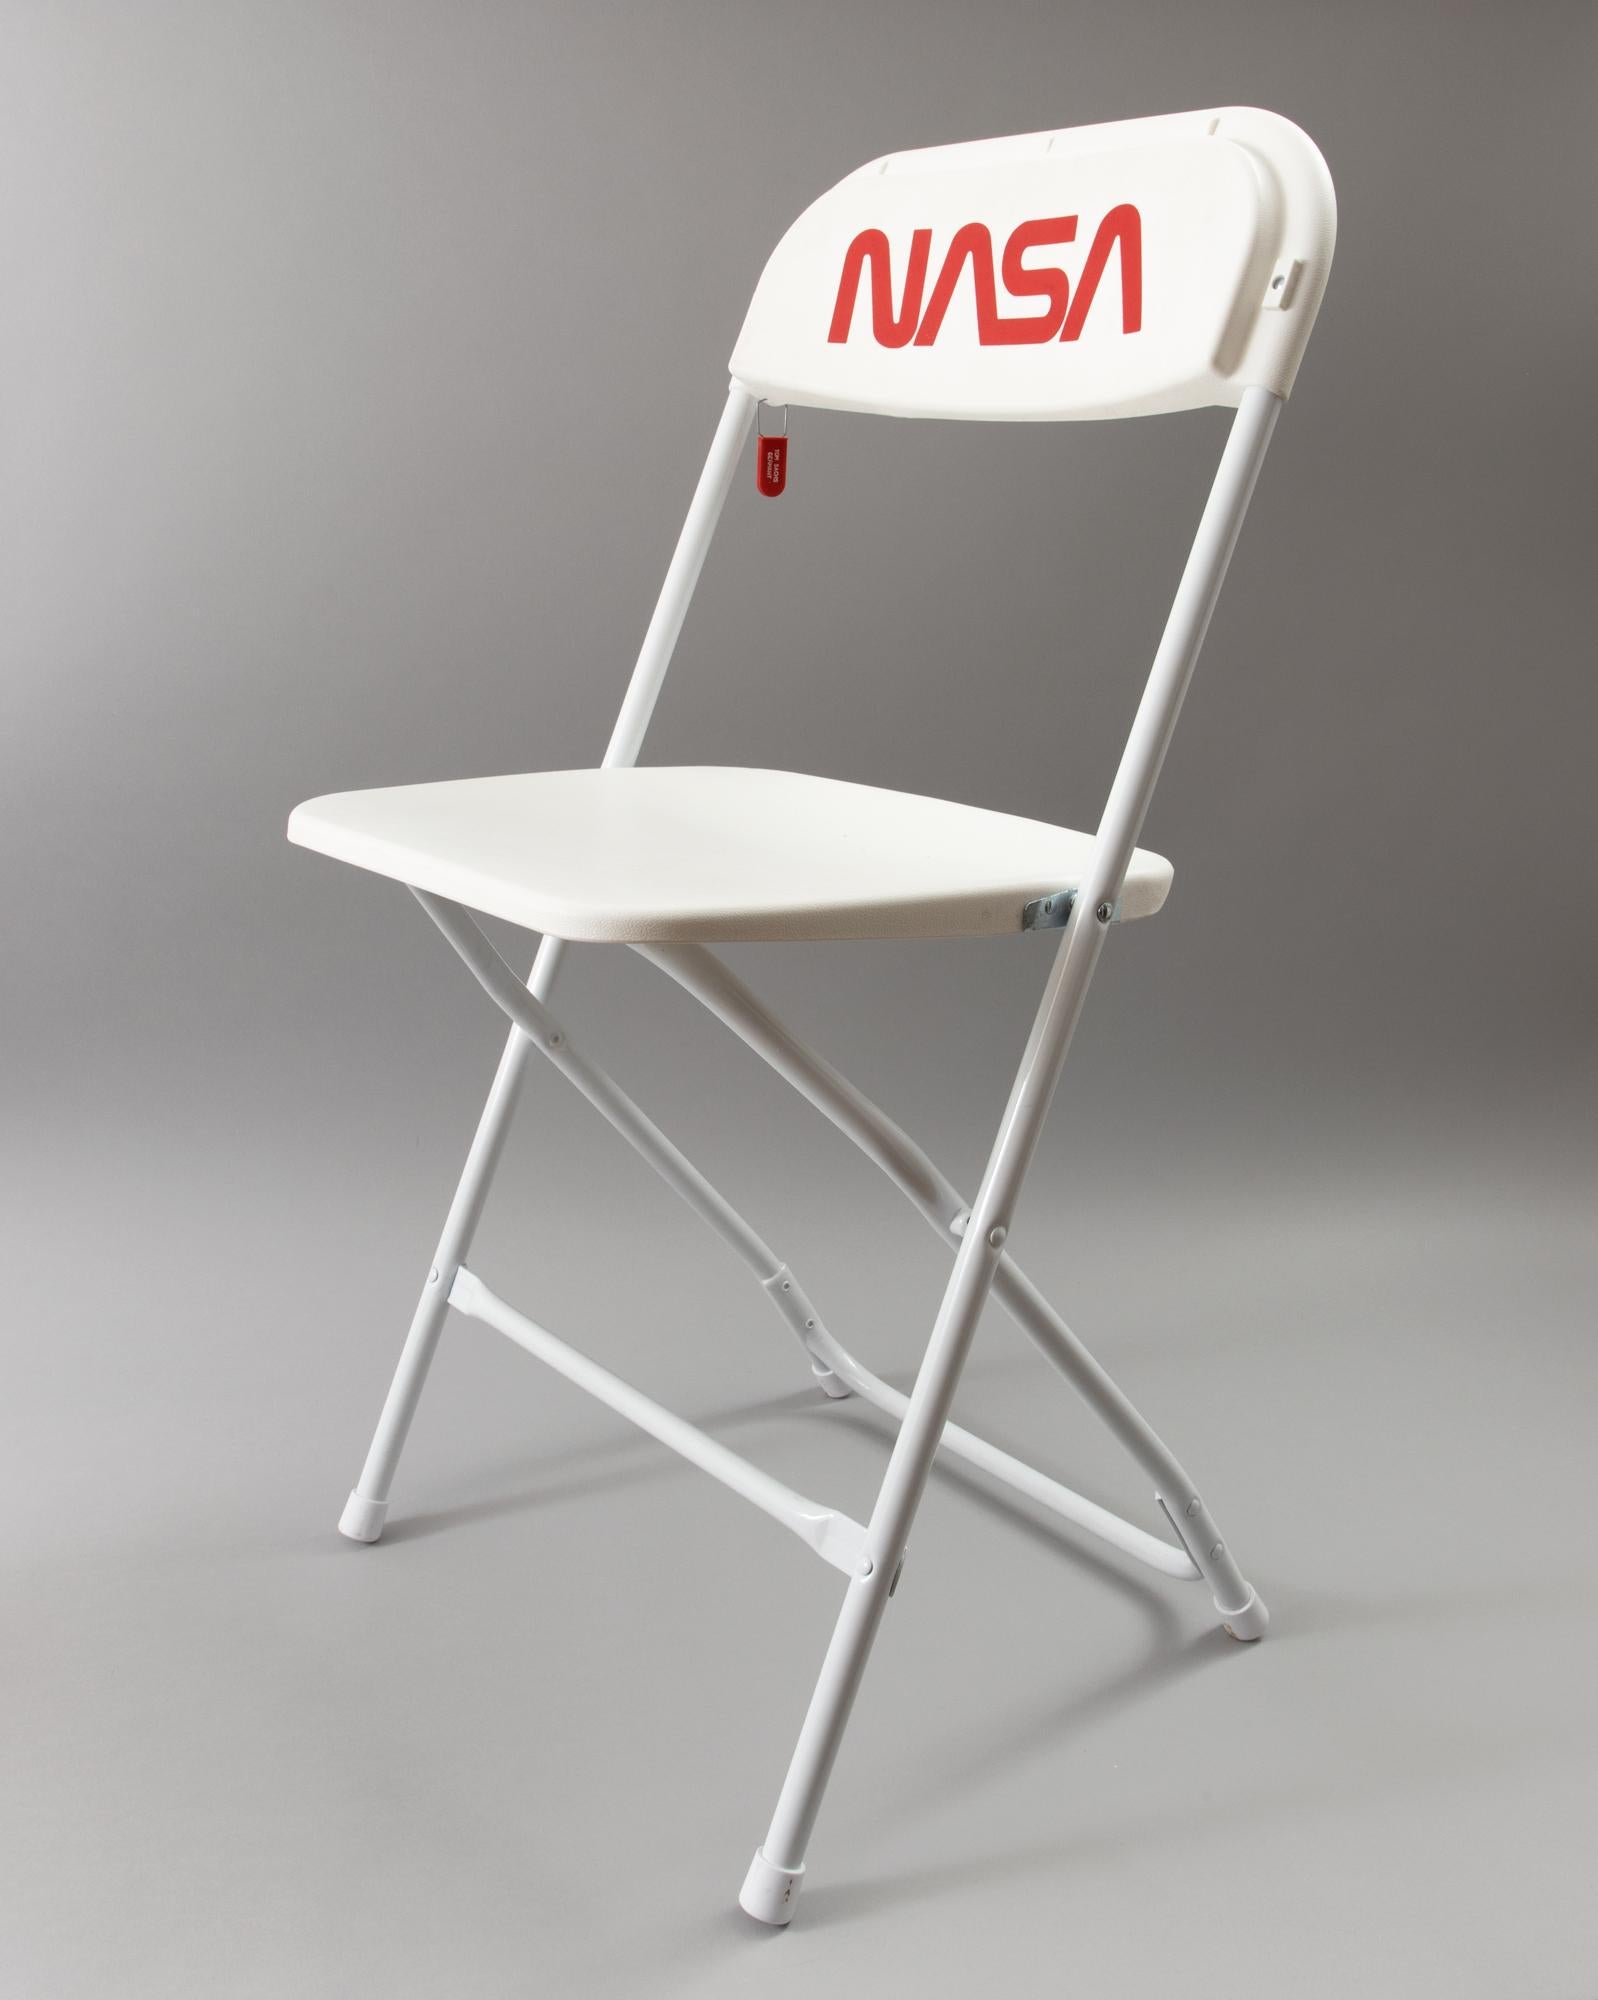 Tom Sachs Abstract Sculpture - NASA Chair (Space Program: Rare Earths), Contemporary Art, Signed and Titled